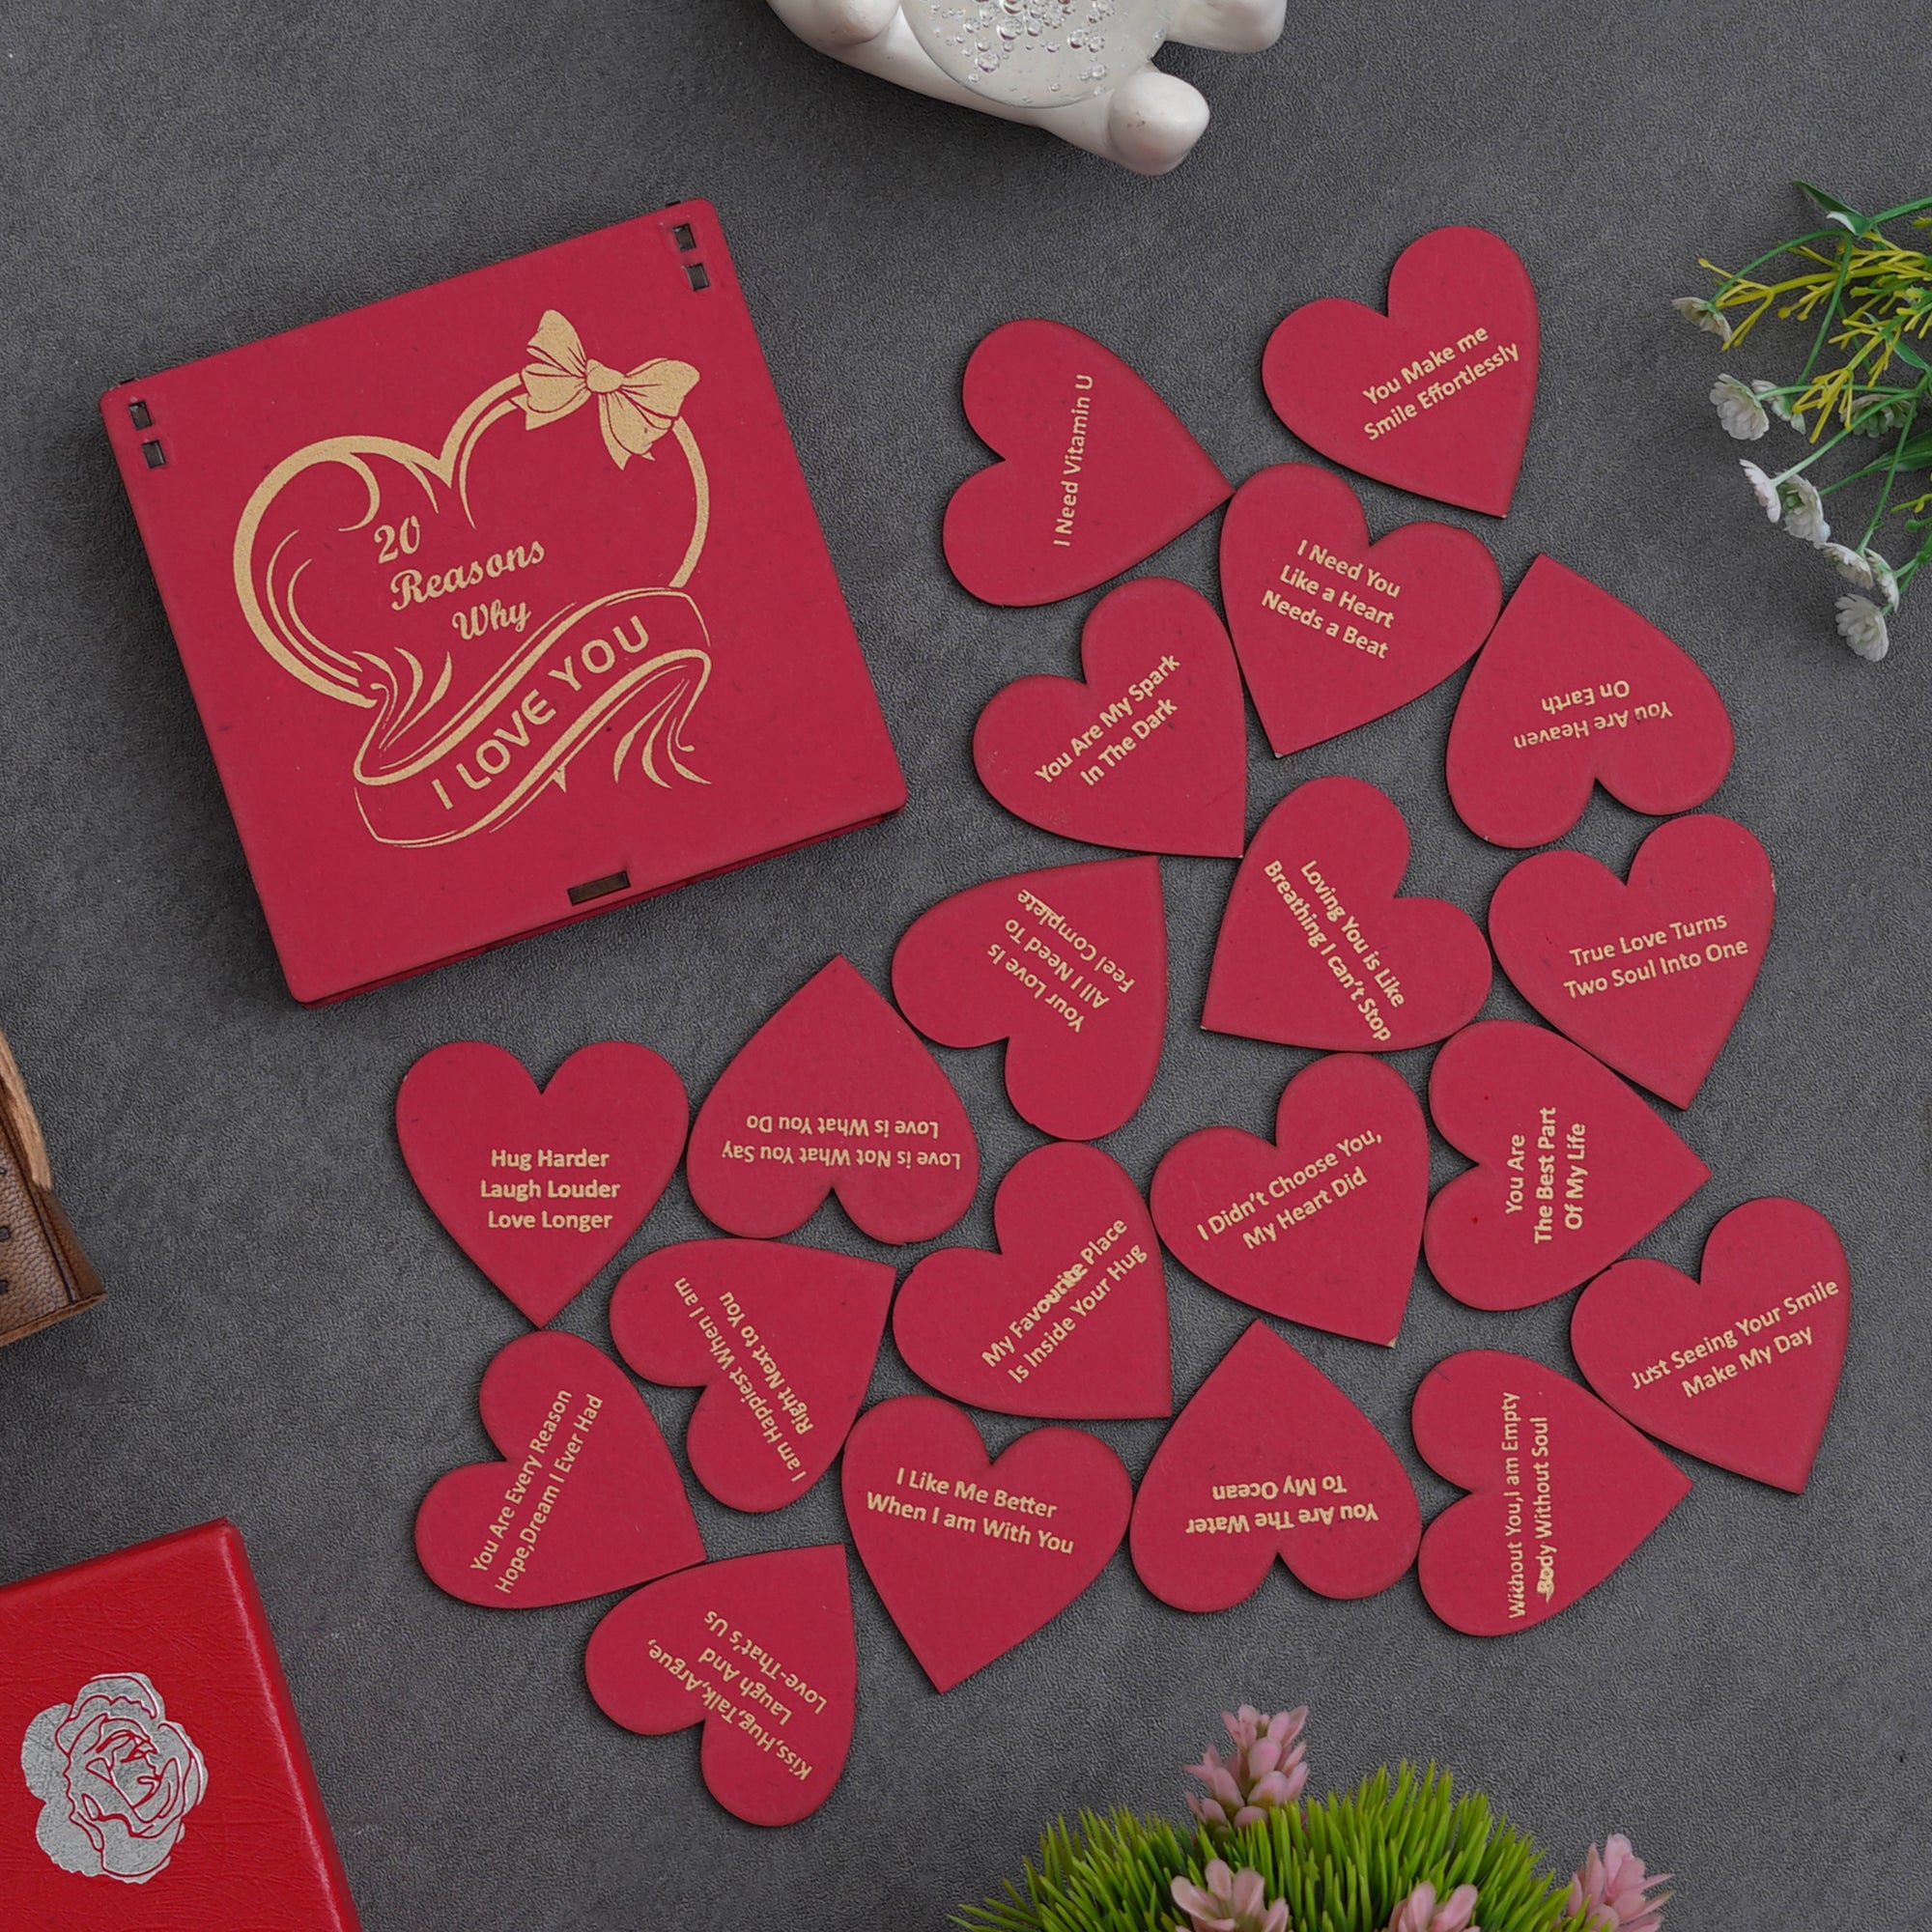 Valentine Combo of Card, Heart Shaped Gift Box Set with White Teddy and Red Roses, "20 Reasons Why I Love You" Printed on Little Red Hearts Decorative Wooden Gift Set Box 5